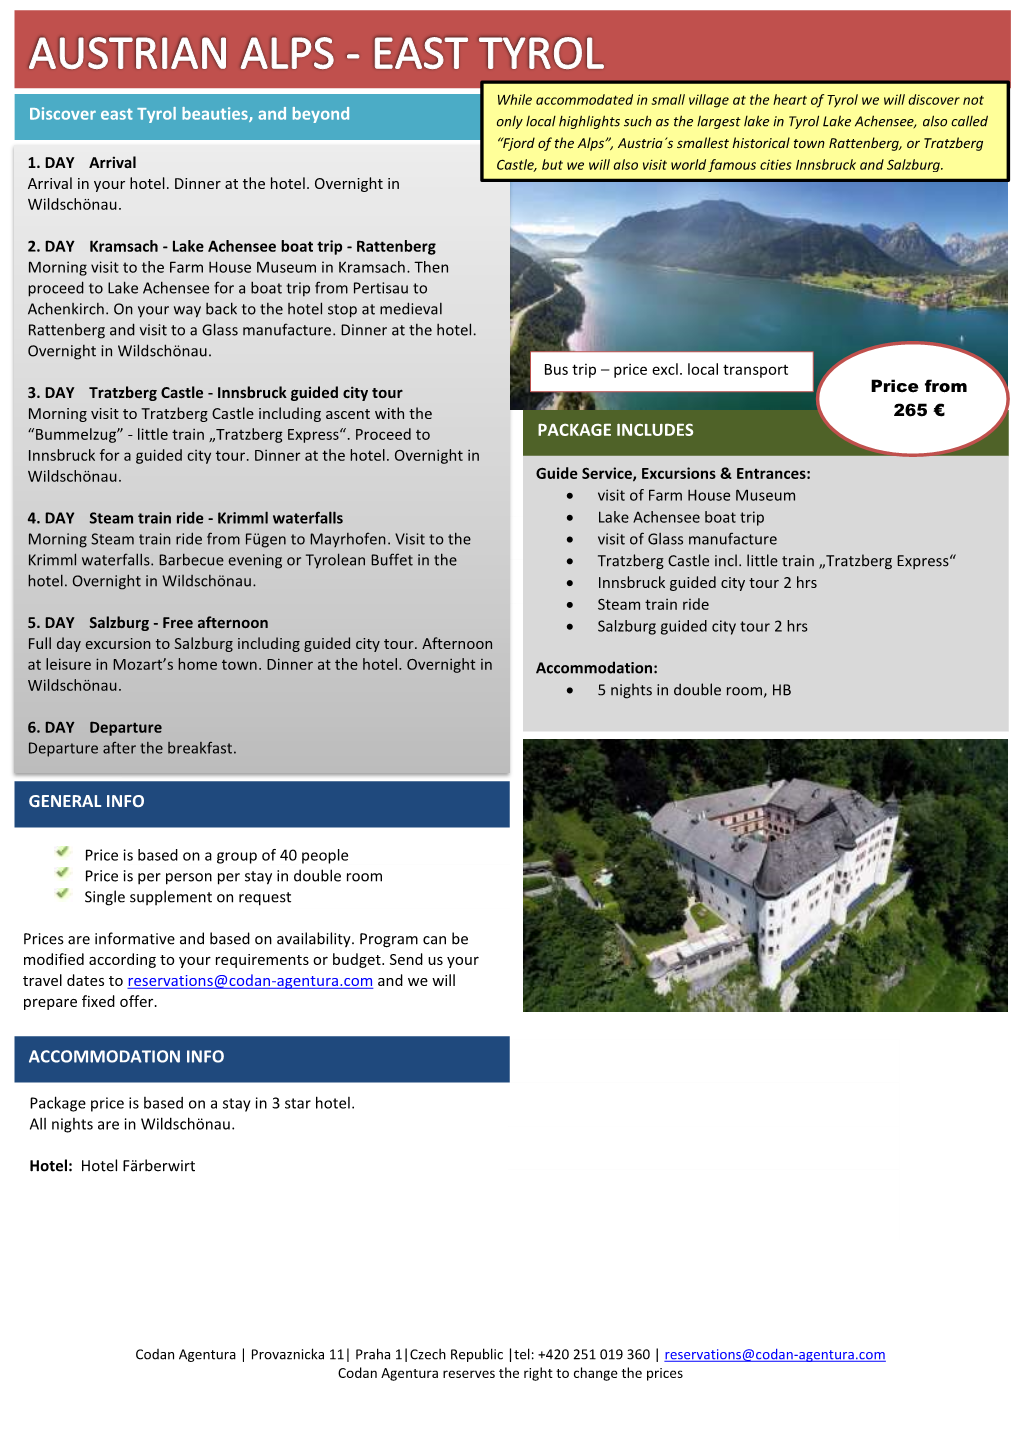 ACCOMMODATION INFO PACKAGE INCLUDES GENERAL INFO S Discover East Tyrol Beauties, and Beyond